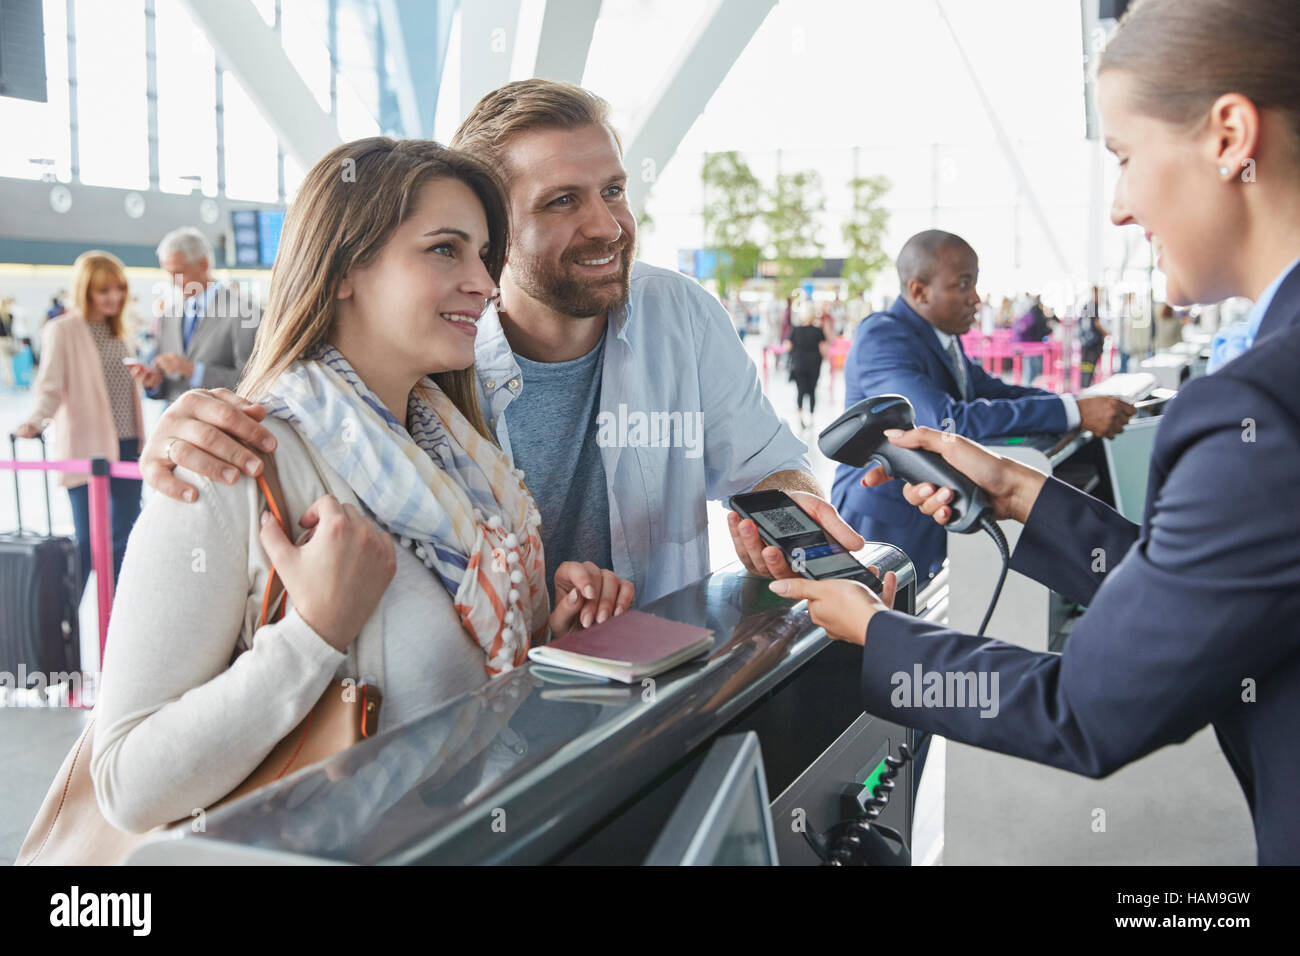 Customer service representative scanning smart phone QR code at airport check-in counter Stock Photo